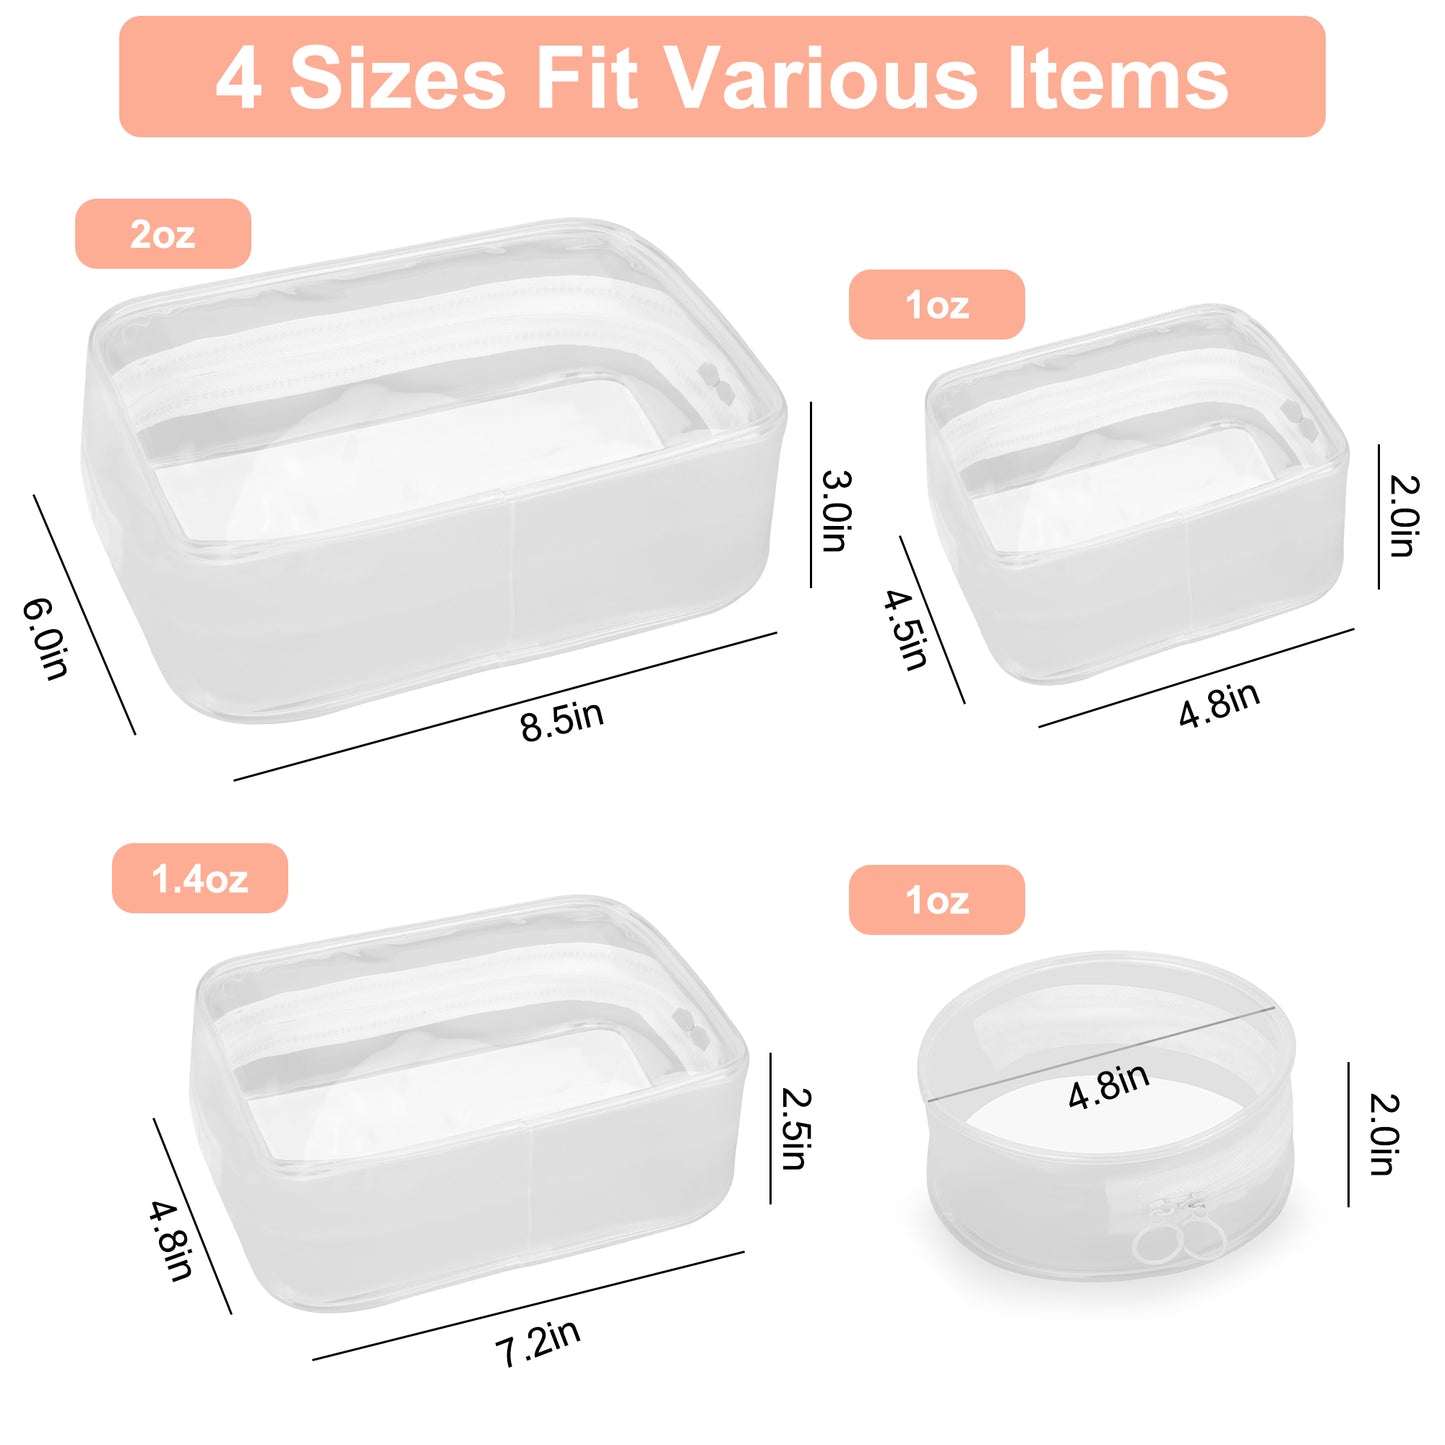 4 Pcs Clear Approved Travel Toiletry Bag Set - Portable Multipurpose Travel Space Saver Organizer Bags,Makeup Bags,Cosmetics Bag,Carry on Airport Airline Compliant Bag,for Women